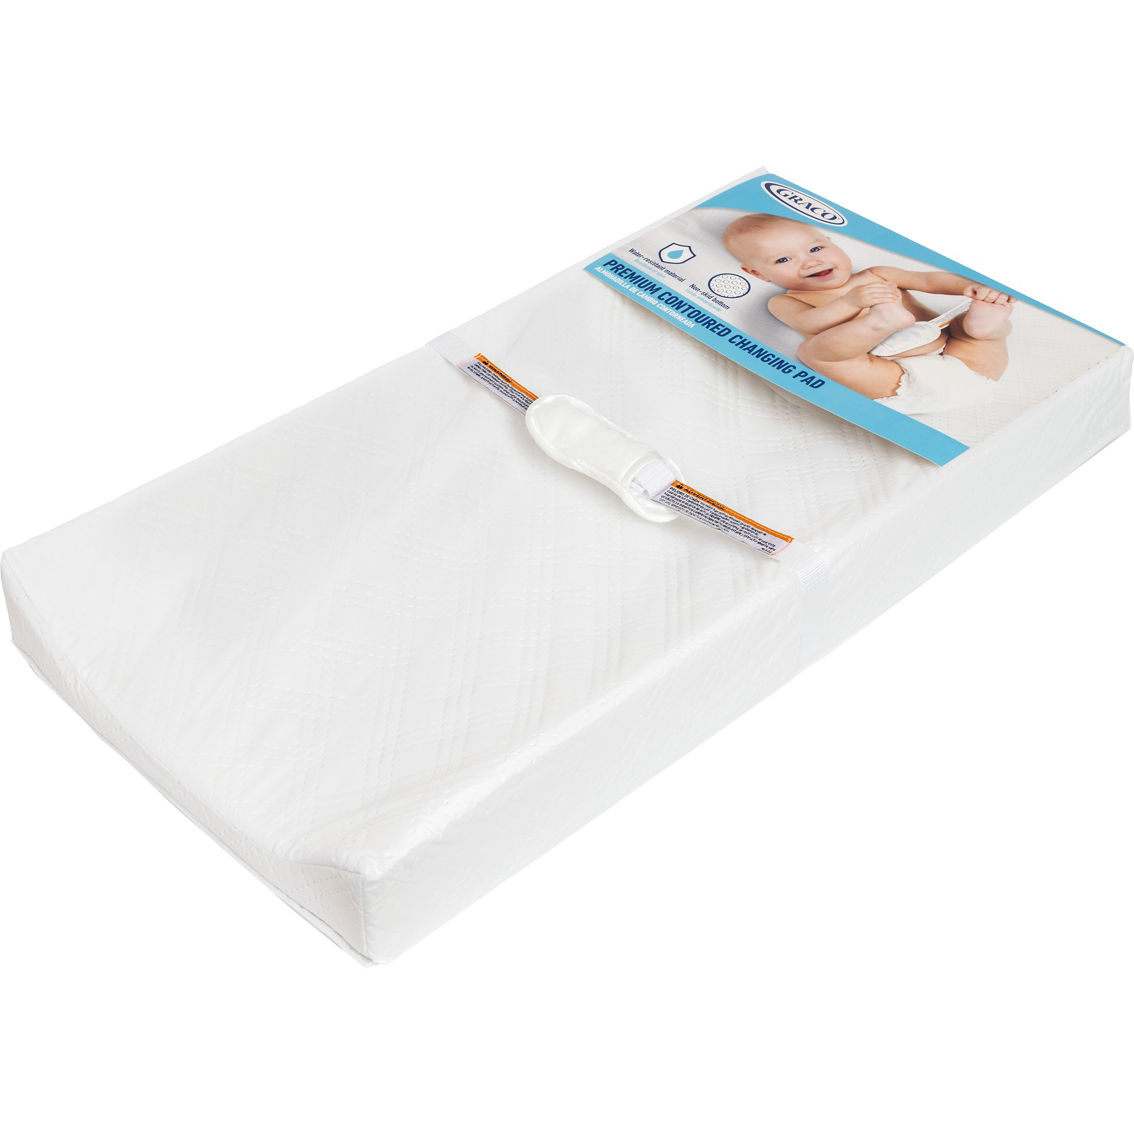 Graco Premium Contoured Infant and Baby Changing Pad - Image 2 of 7